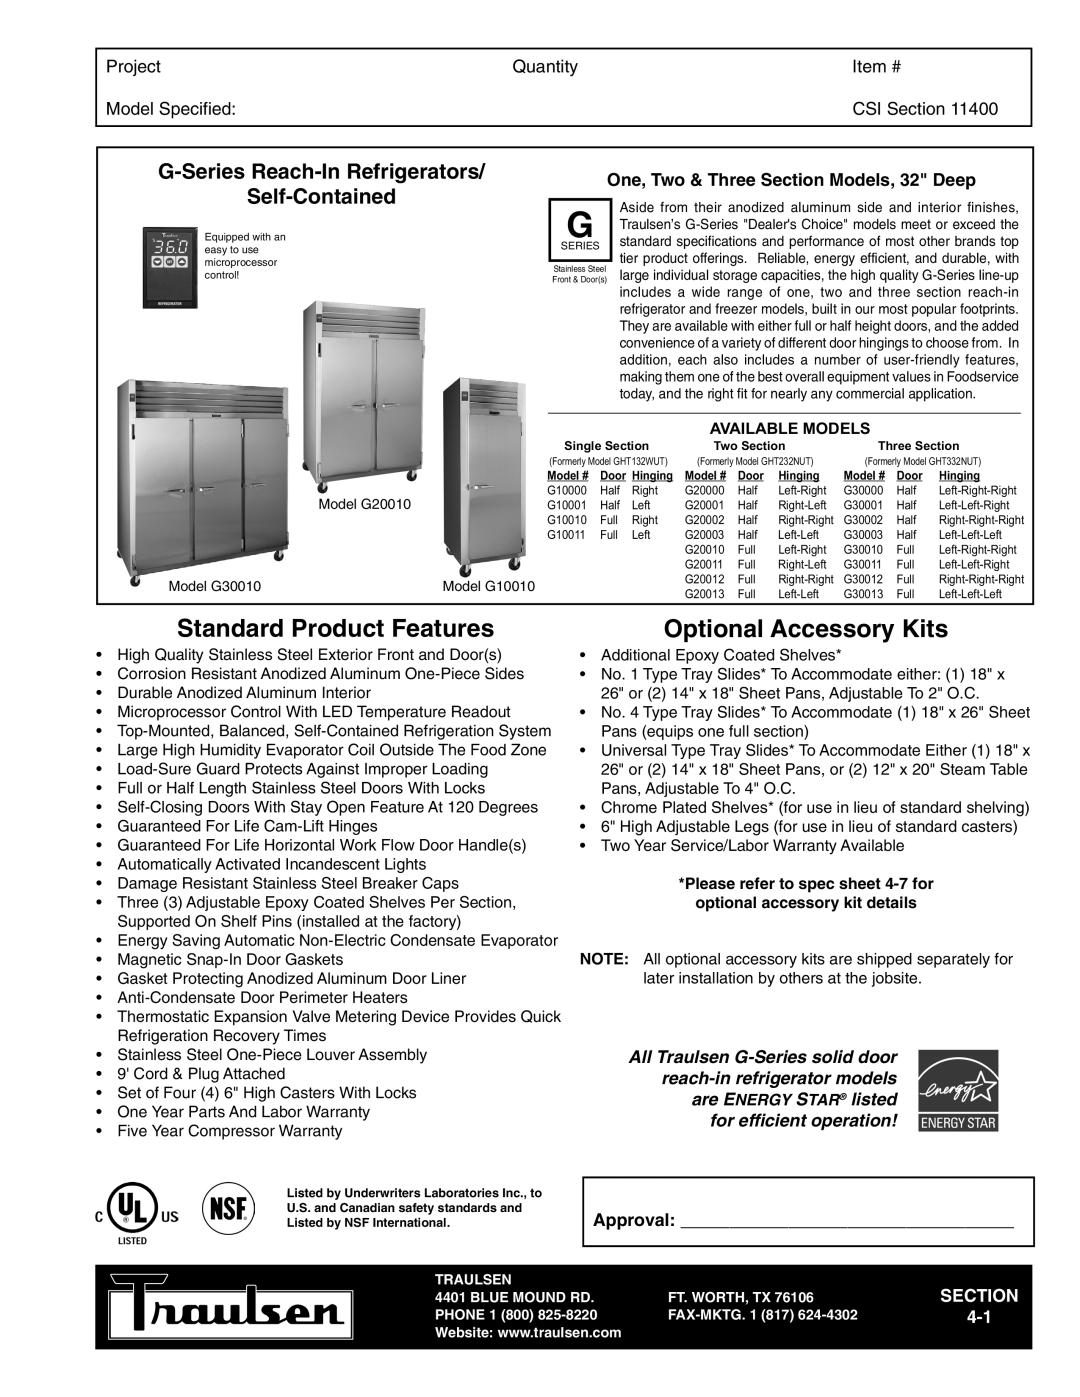 Traulsen TR35787 warranty G-Series Reach-InRefrigerators, Self-Contained, Project, Quantity, Item #, Model Specified 